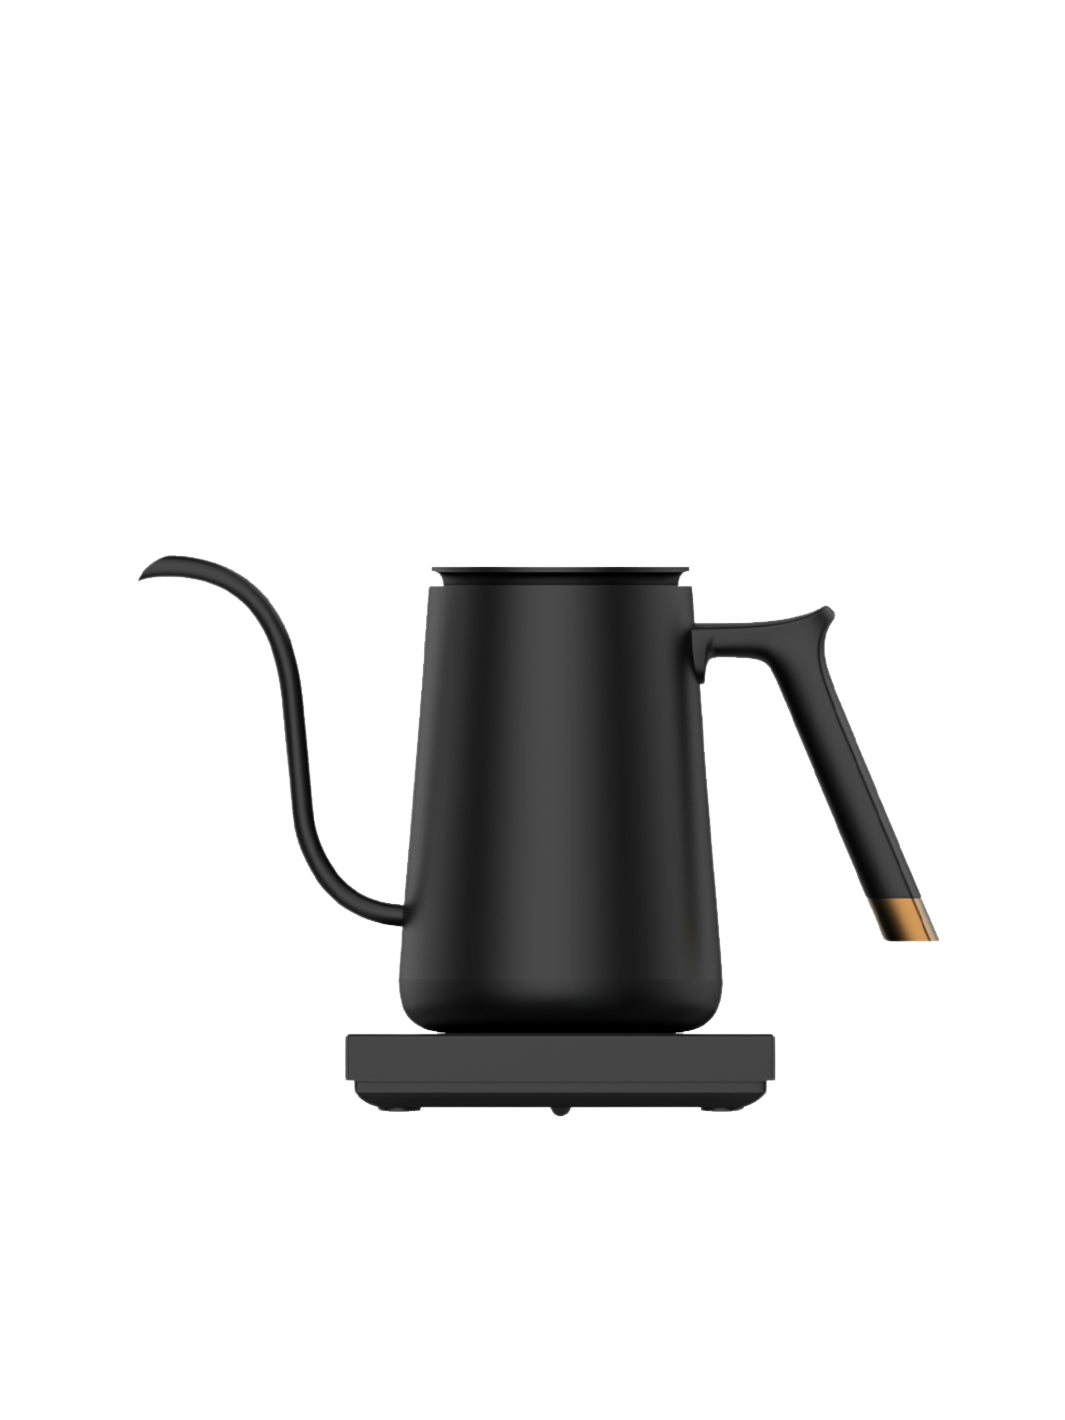 Timemore Fish Electric Pourover Kettle (800mL/1350W)